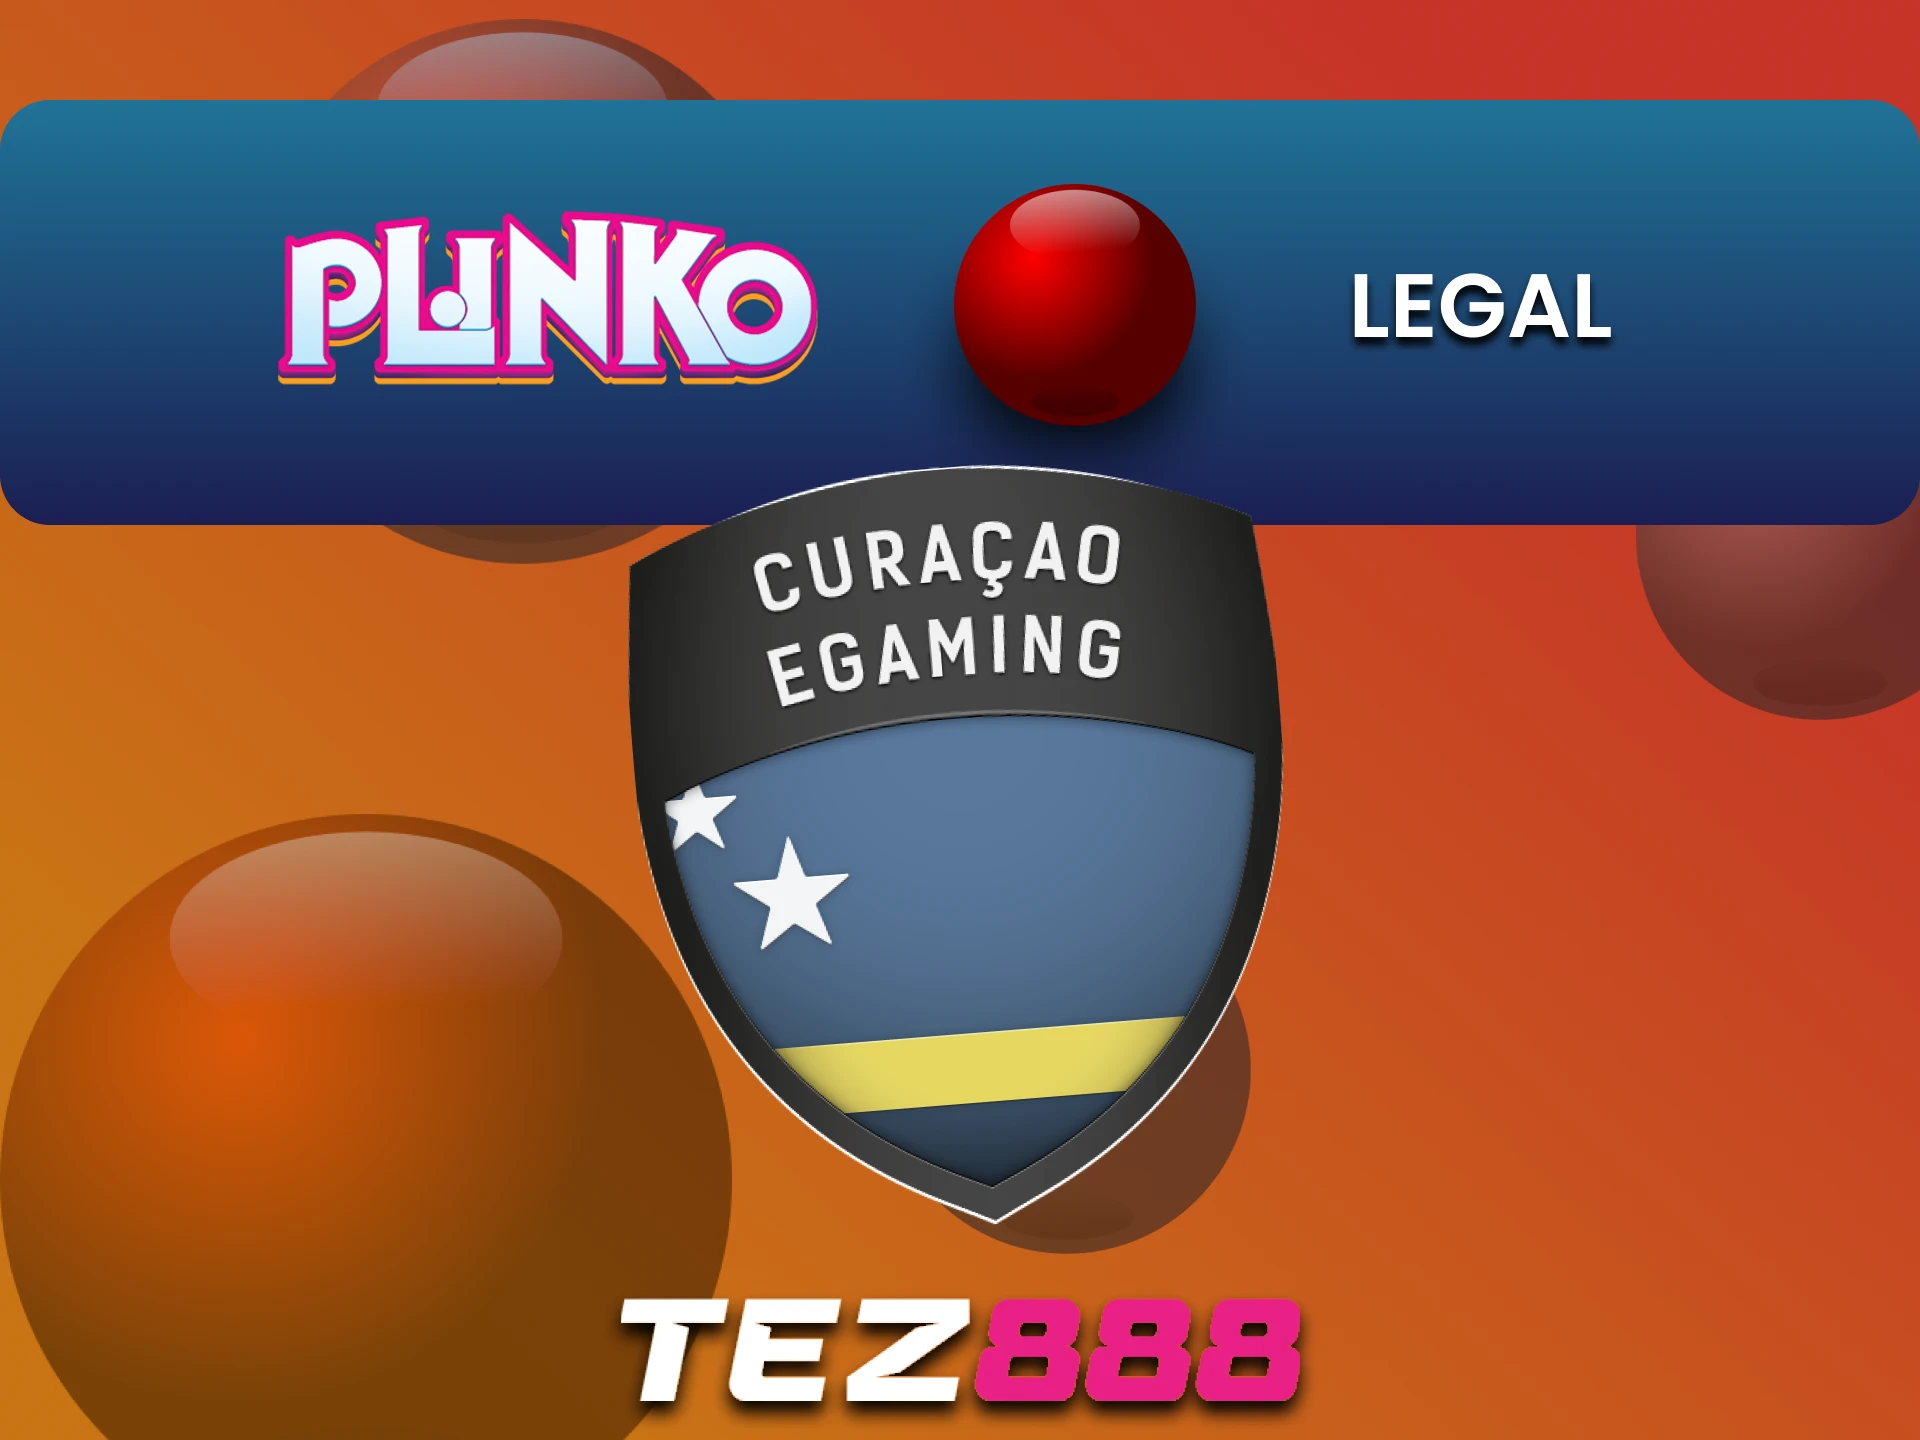 Tez888 is legal to play Plinko in India.